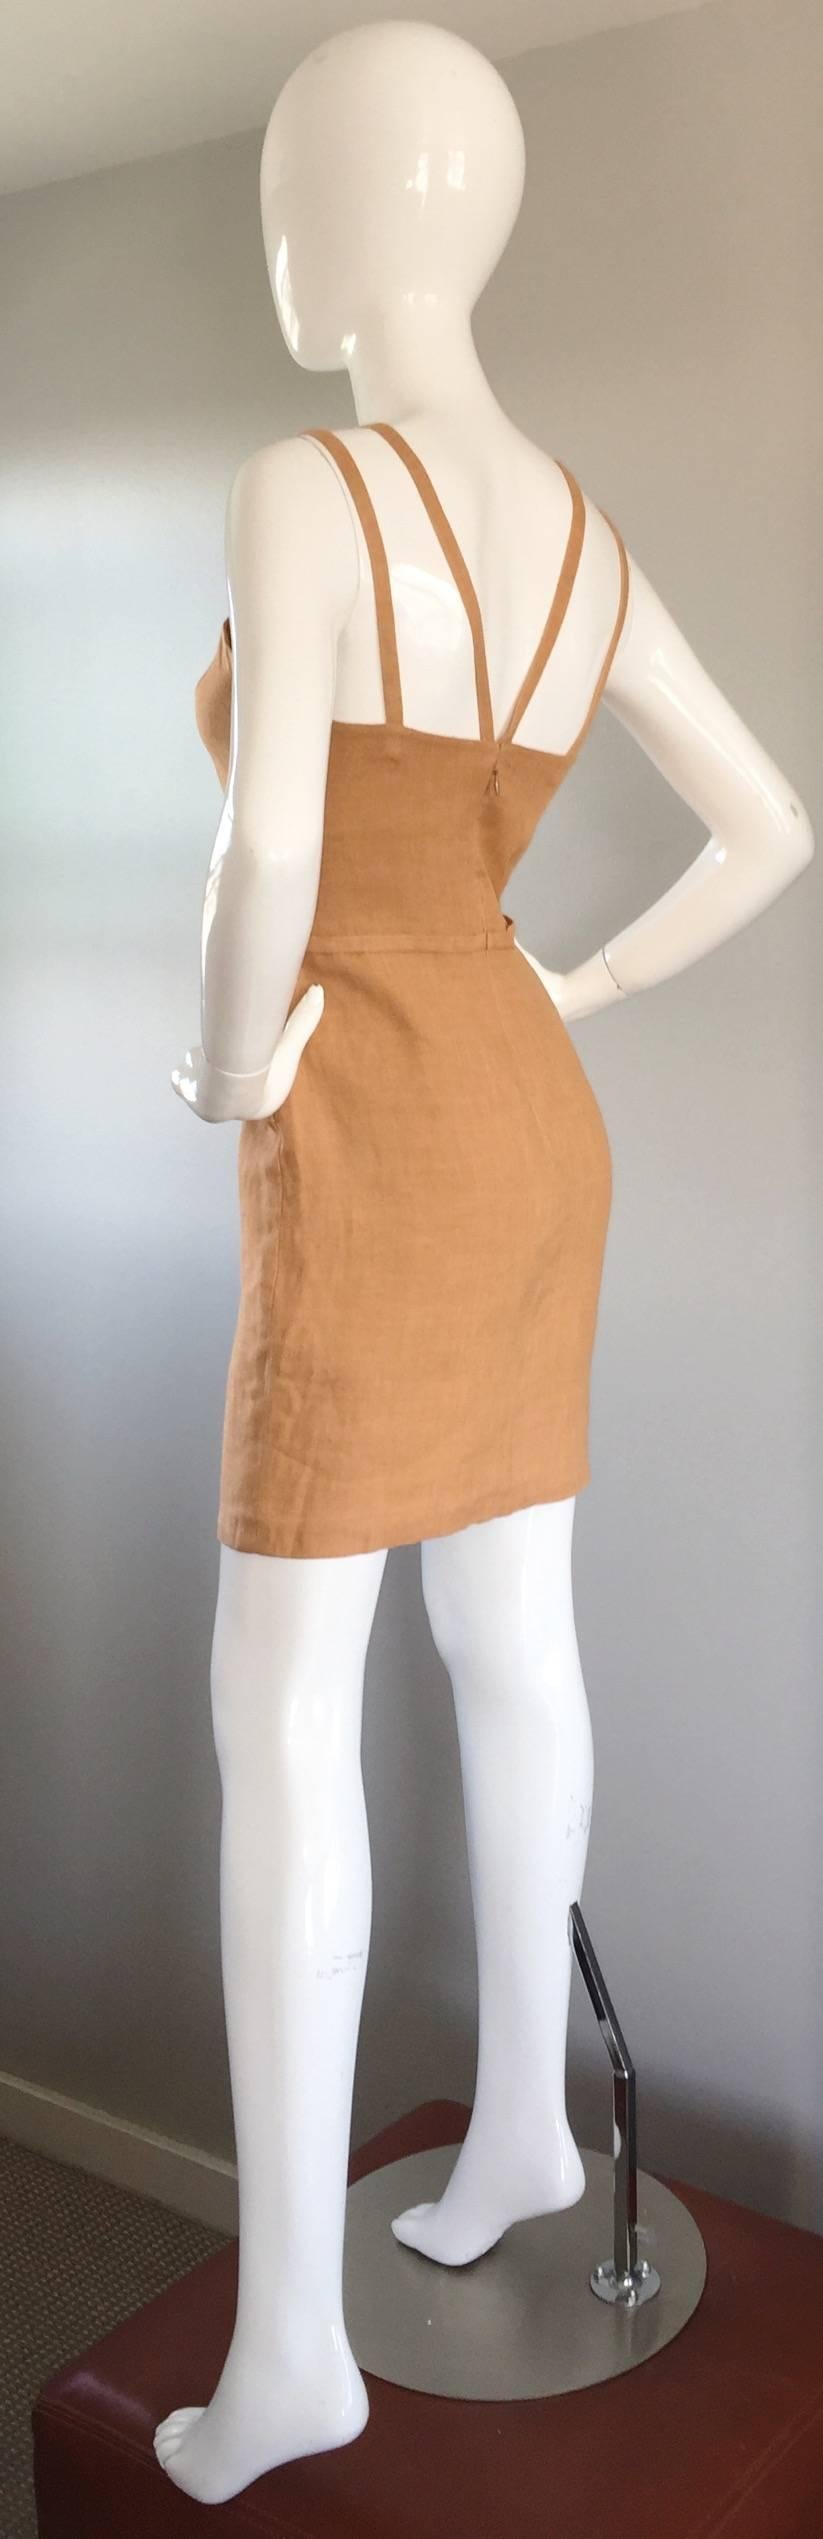 Such a chic late 1970s / early 1980s BILL BLASS linen dress! Features a chic double strap, that criss-crosses in the back. Slight peplum in the front, adorned with a stitched-on bow on left waist. Such a figure flattering dress from one of the top